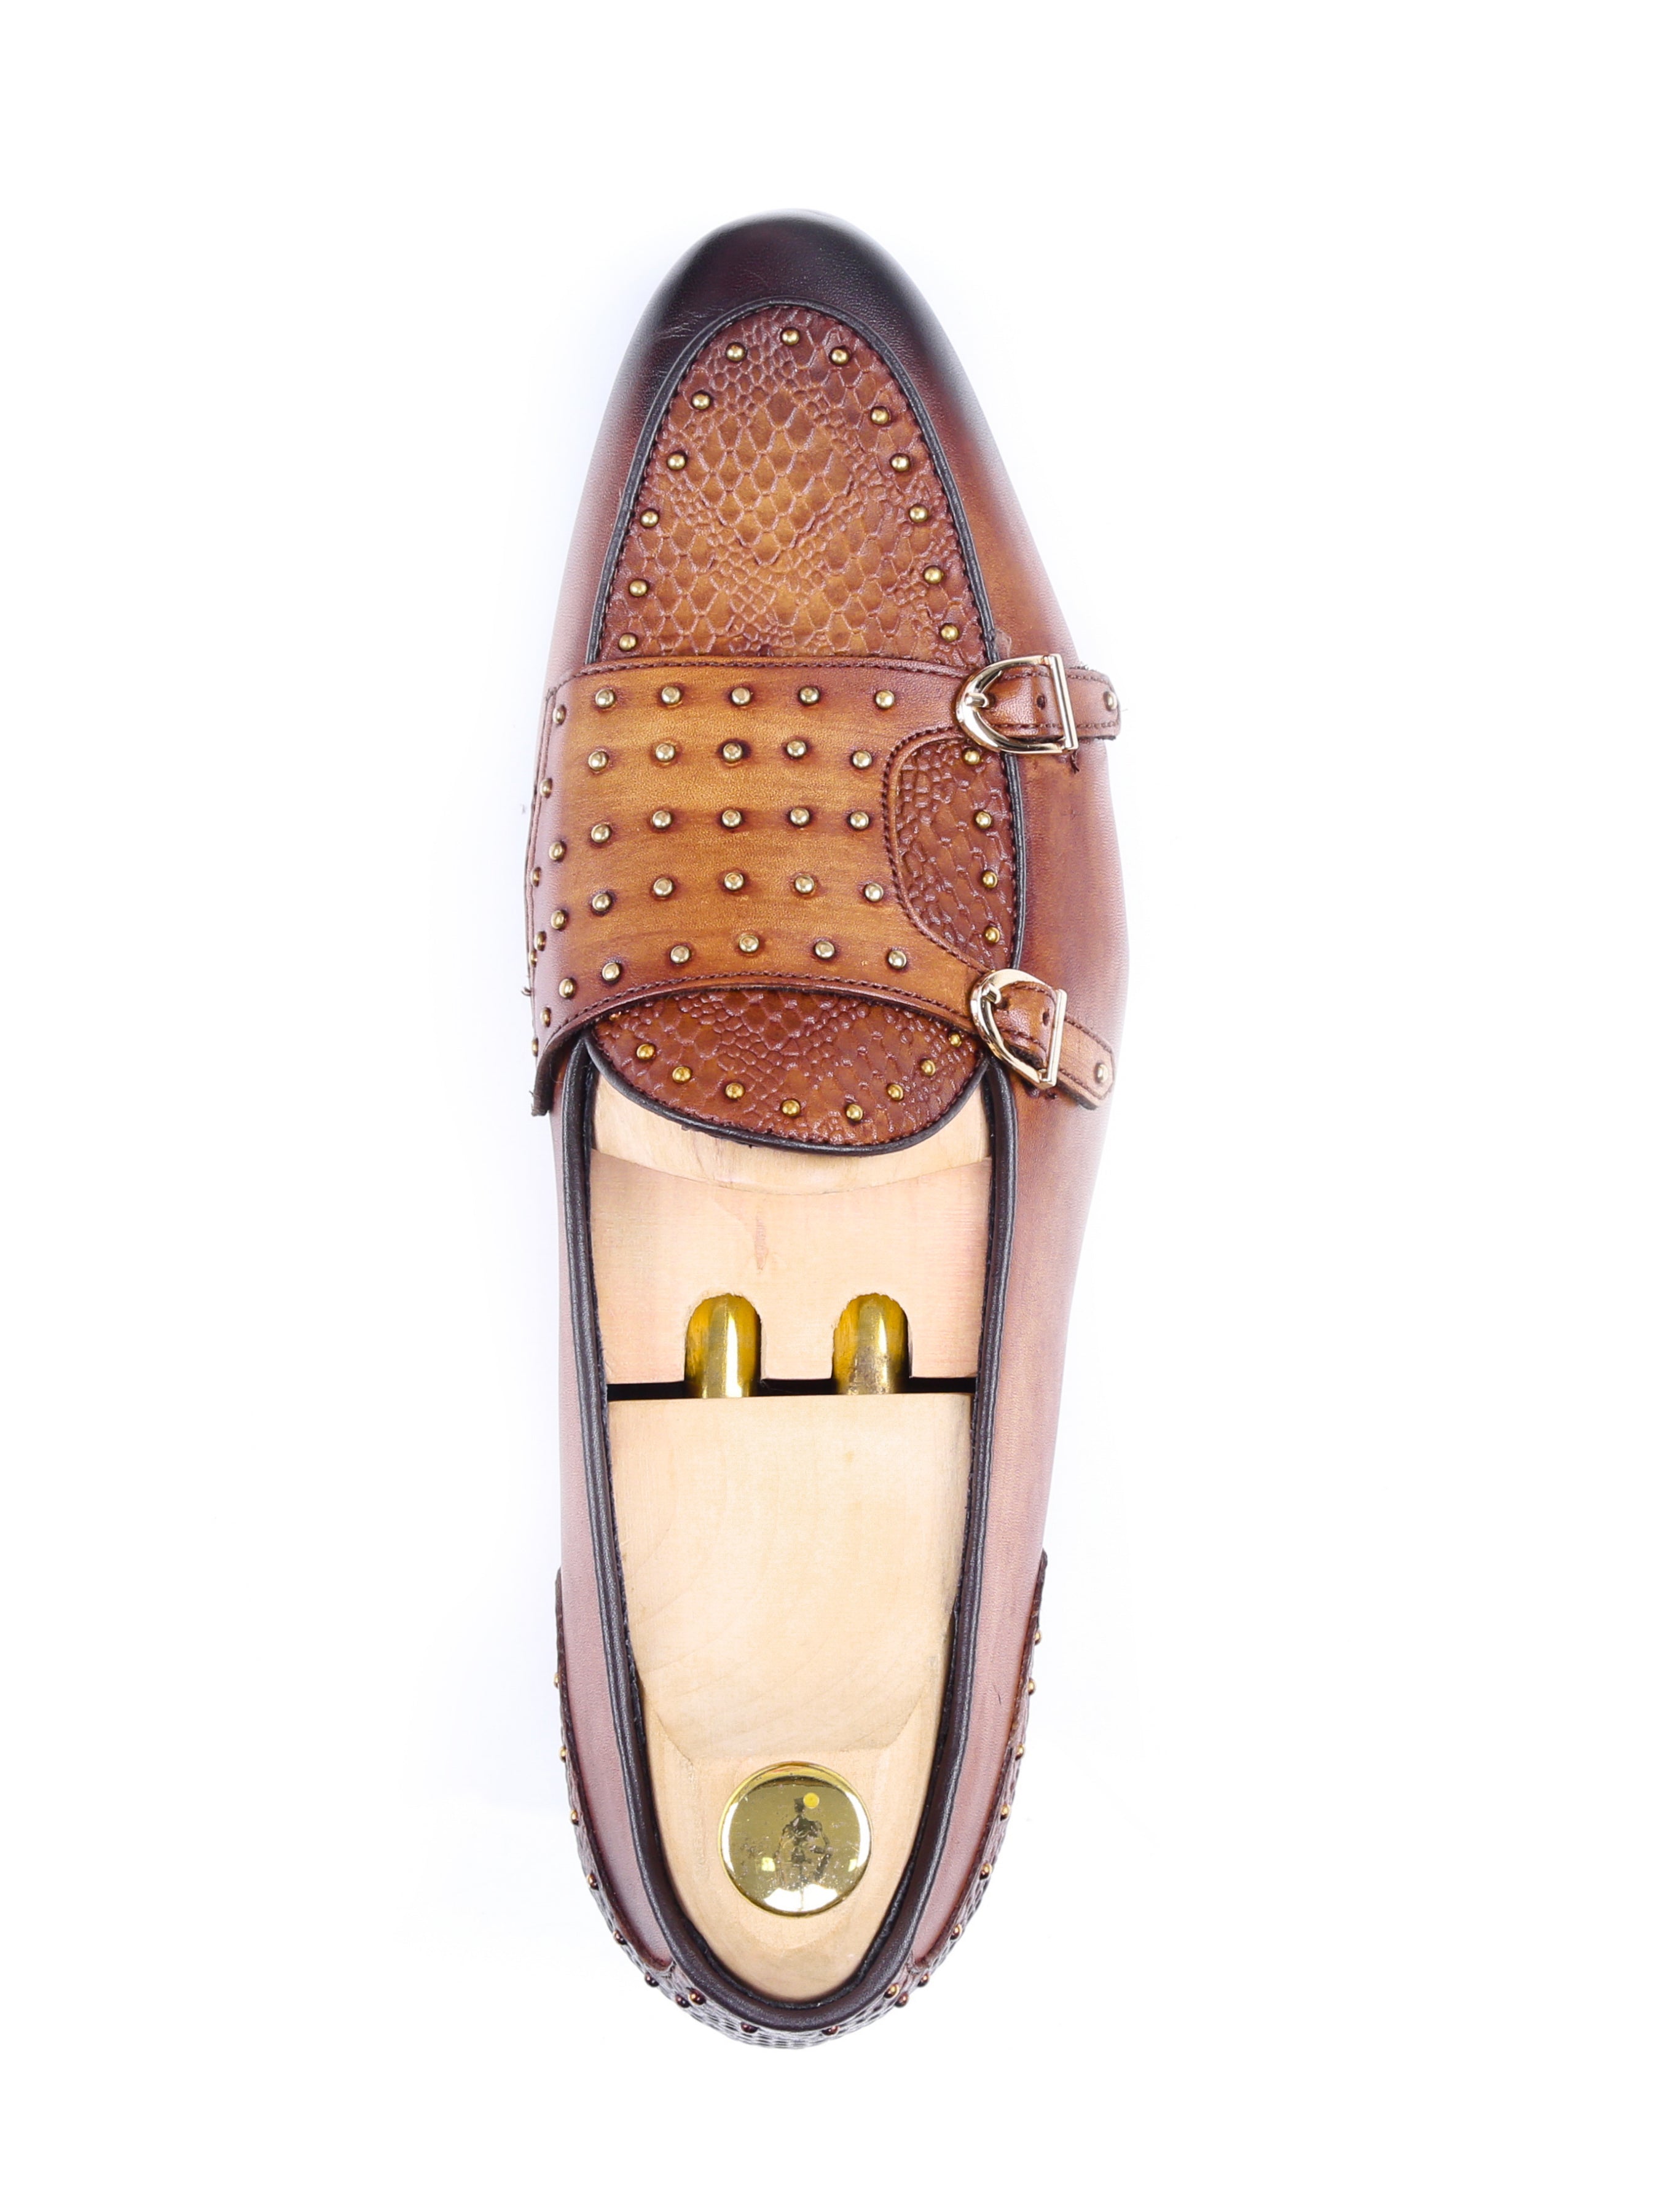 Belgian Loafer - Cognac Tan Snake Skin Double Monk Strap with Studded (Hand Painted Patina) - Zeve Shoes